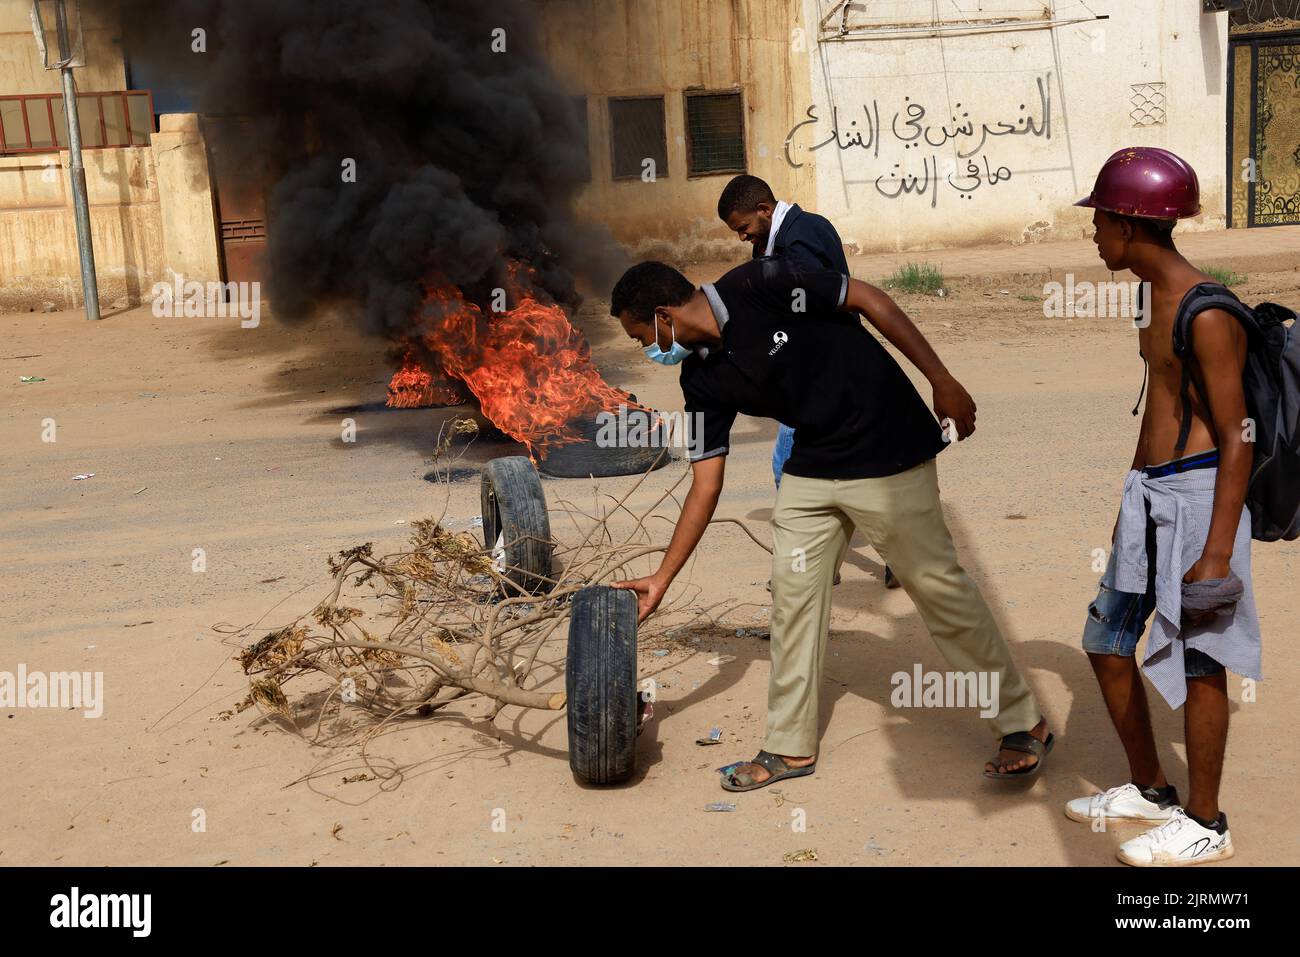 Demonstrators set up tires for a fire barricade during at a rally against military rule following the last coup, in Khartoum, Sudan August 25, 2022. REUTERS/Mohamed Nureldin Abdallah Stock Photo